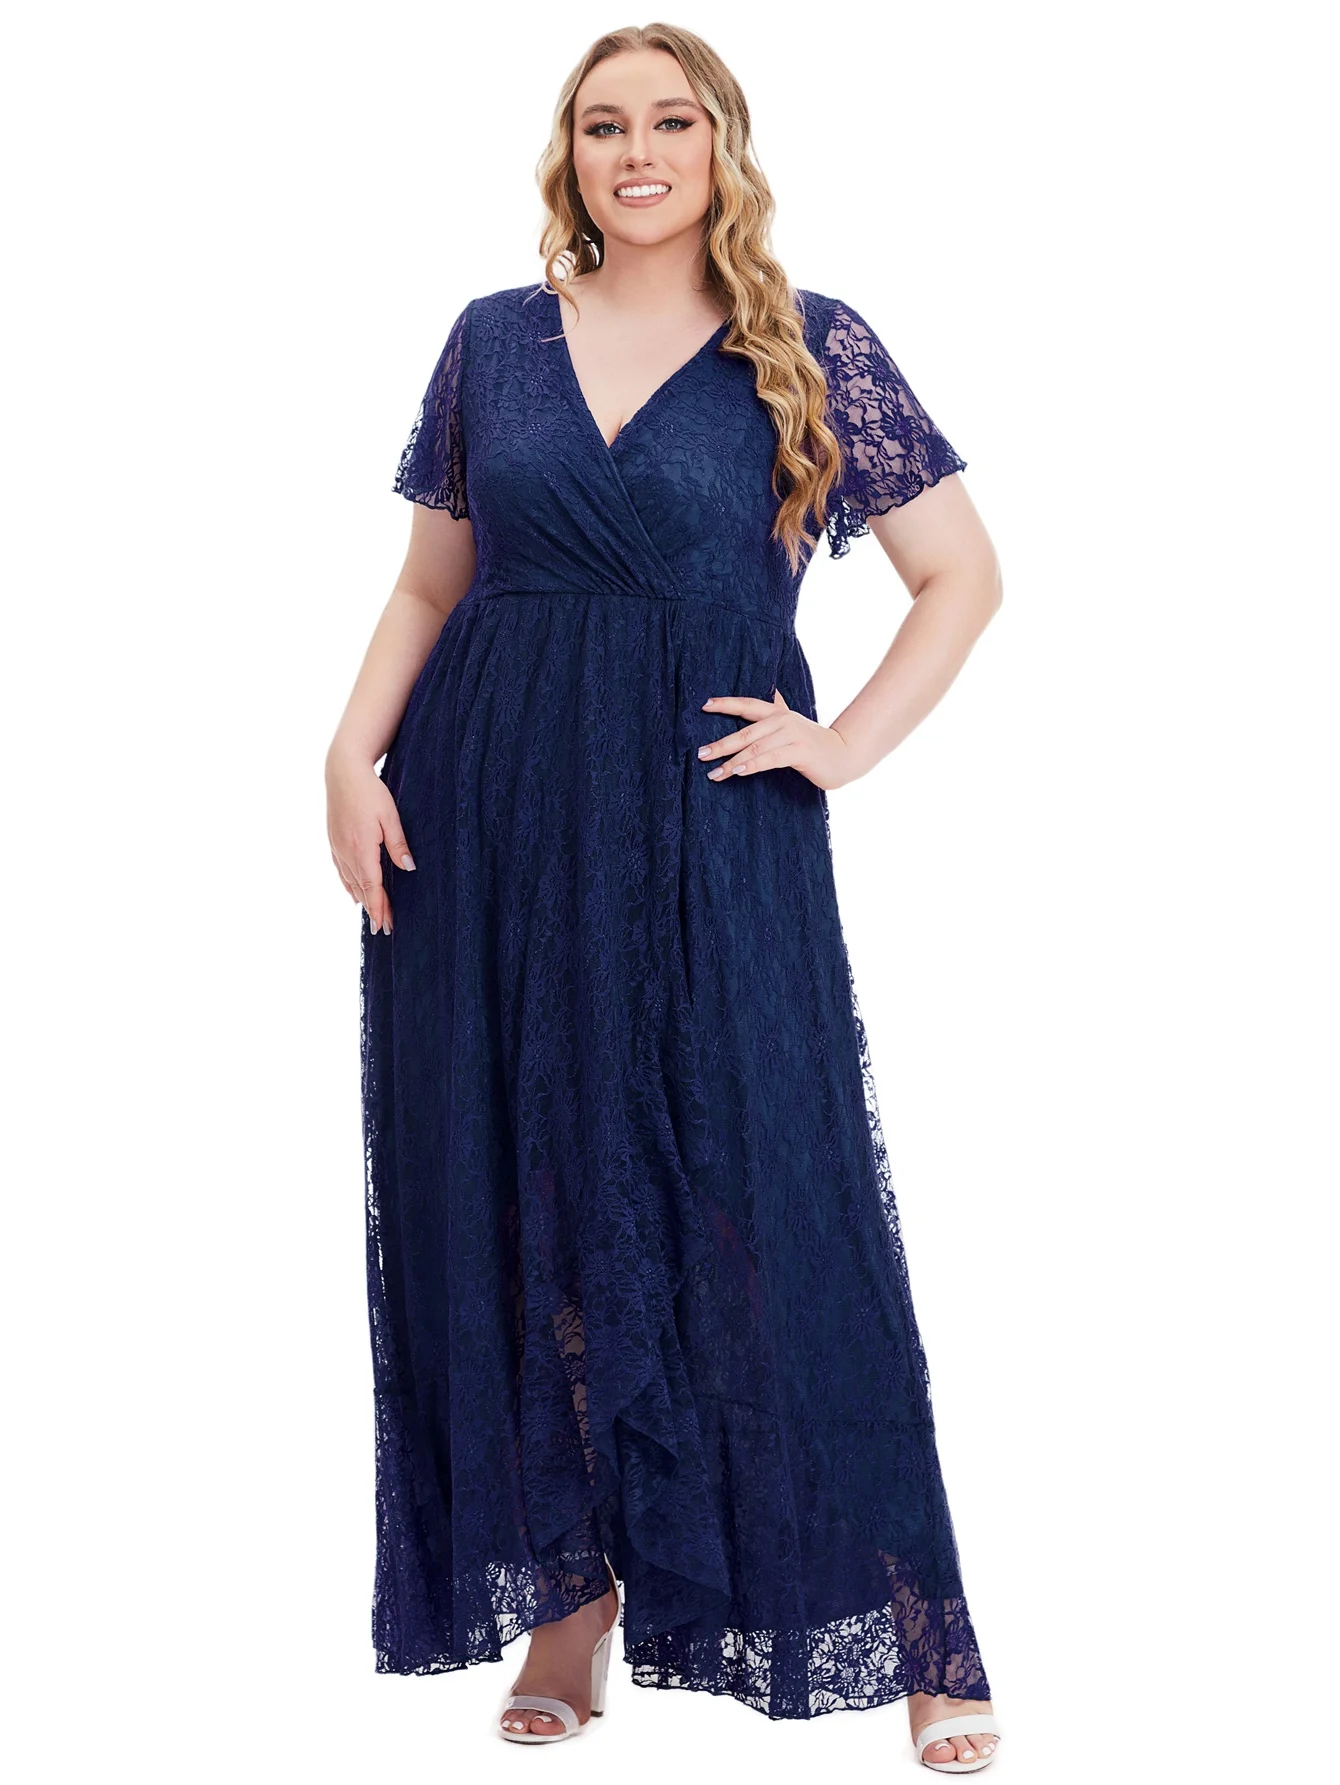 Plus Size High Quality Elegant Evening Party Wedding Lace Dresses For Women